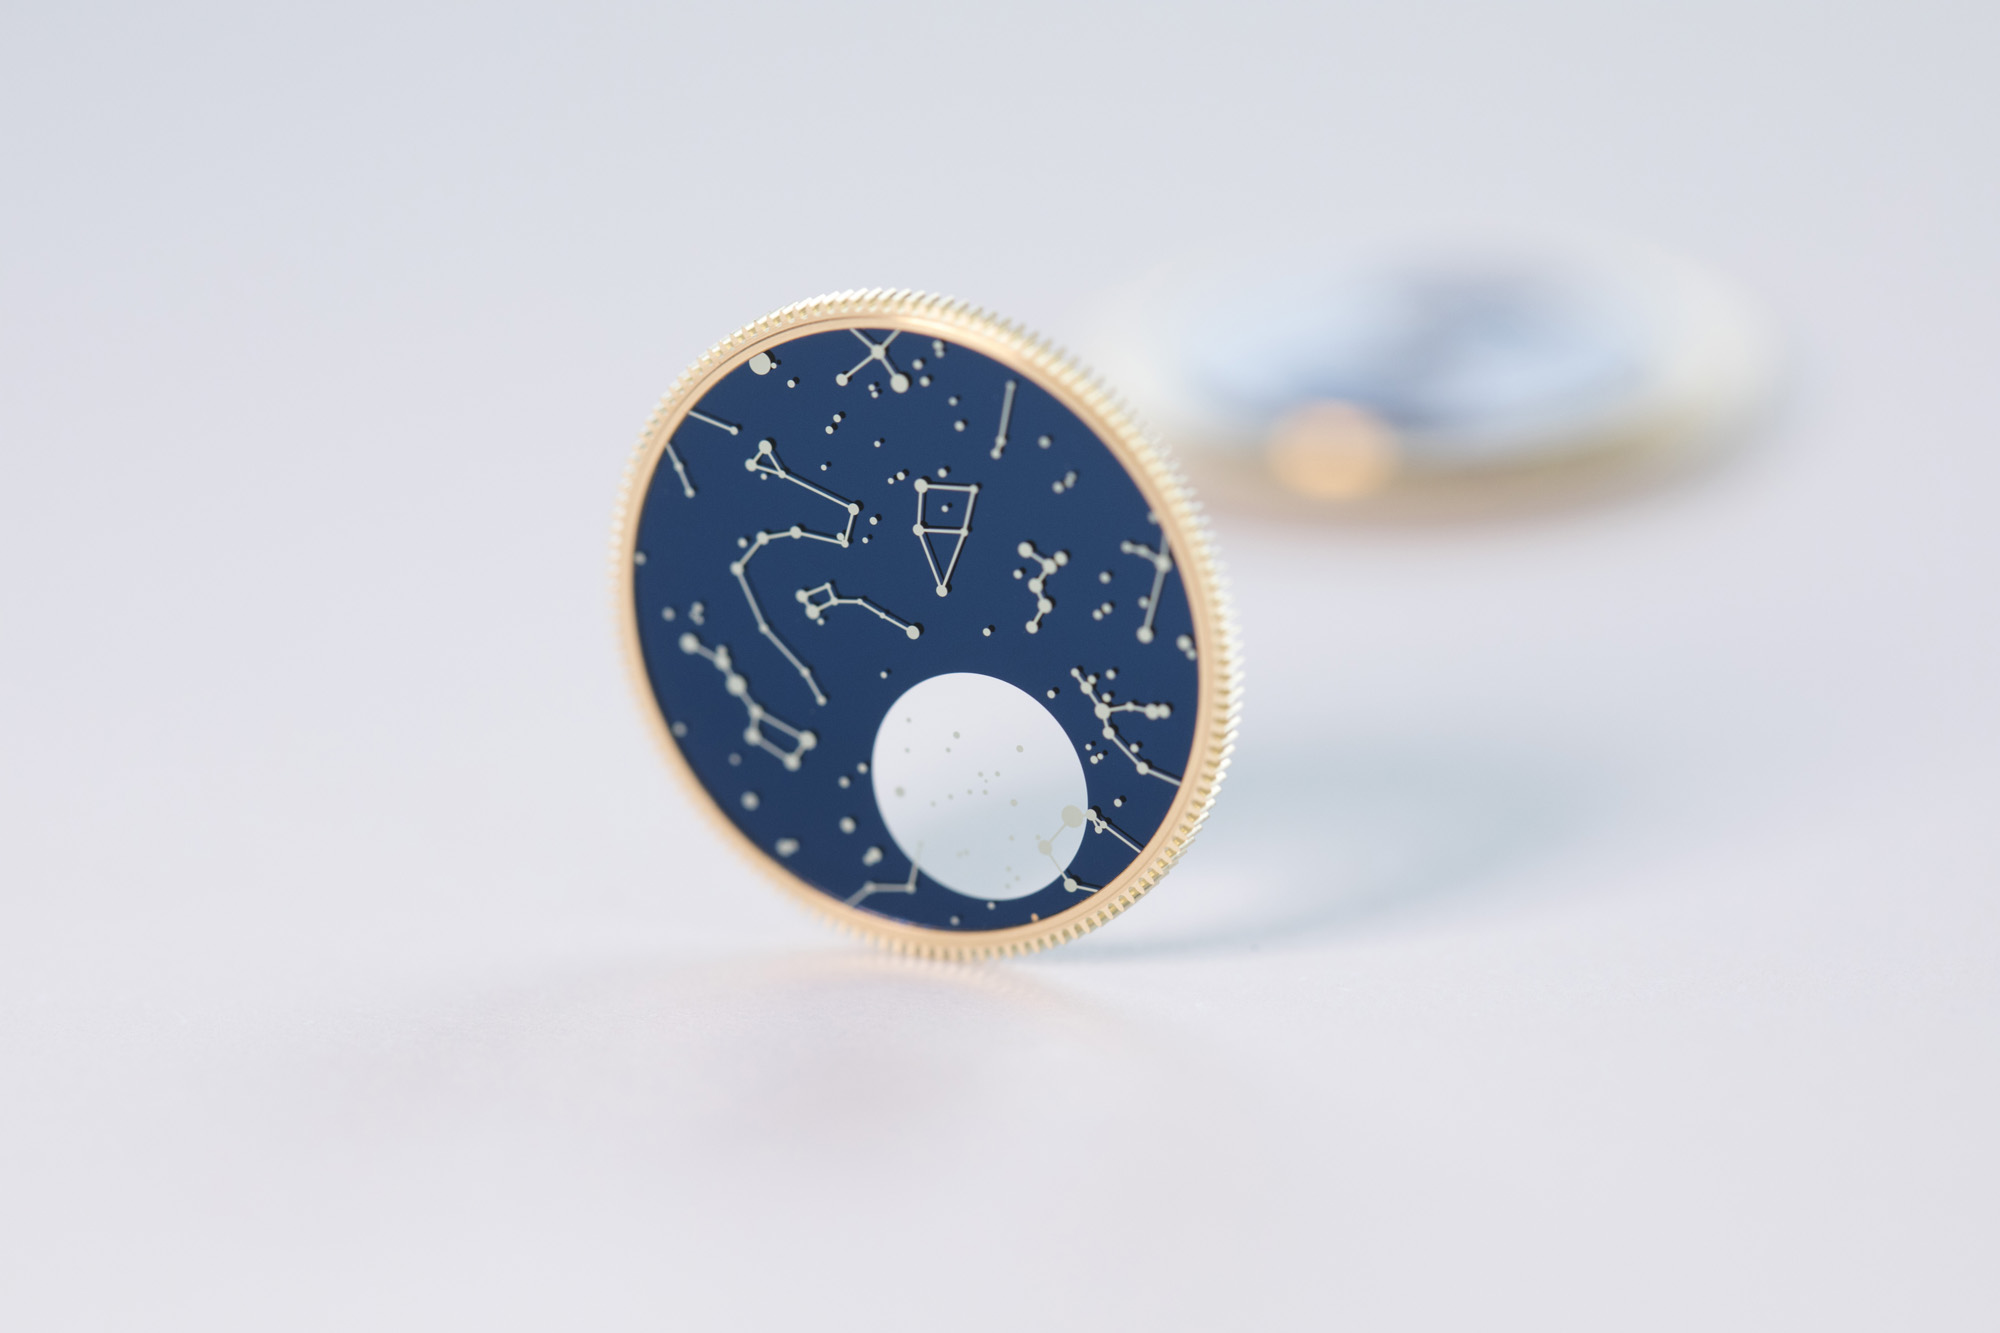 The moon phase display is painted and lacquered to create a shiny appearance